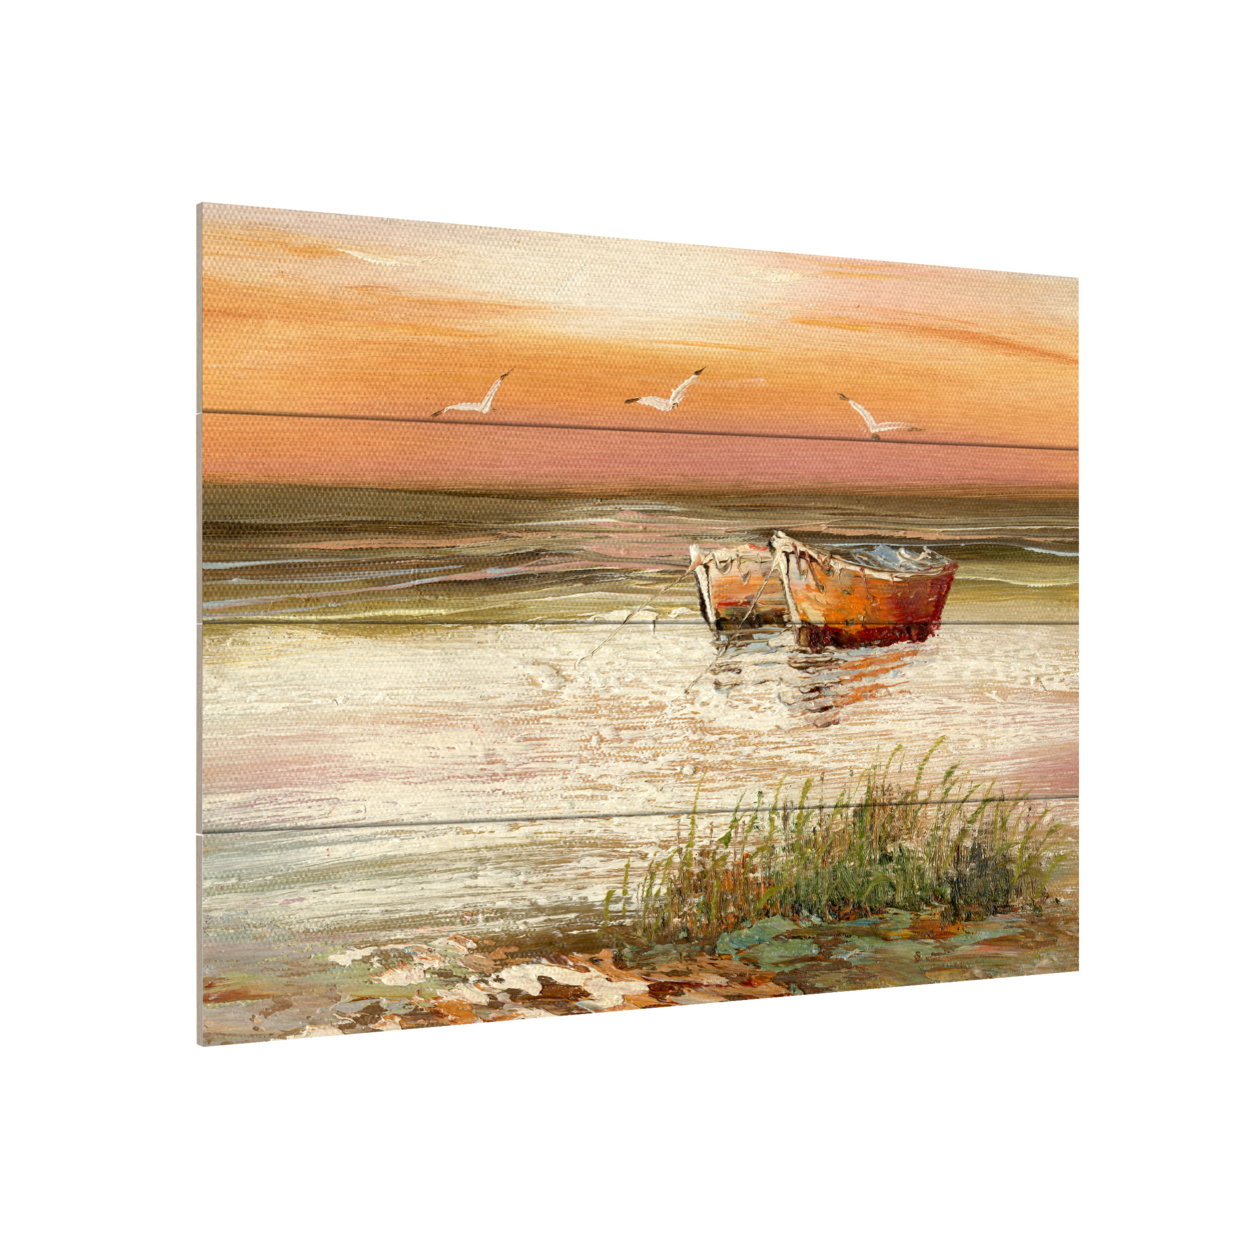 Wall Art 12 X 16 Inches Titled Florida Sunset Ready To Hang Printed On Wooden Planks